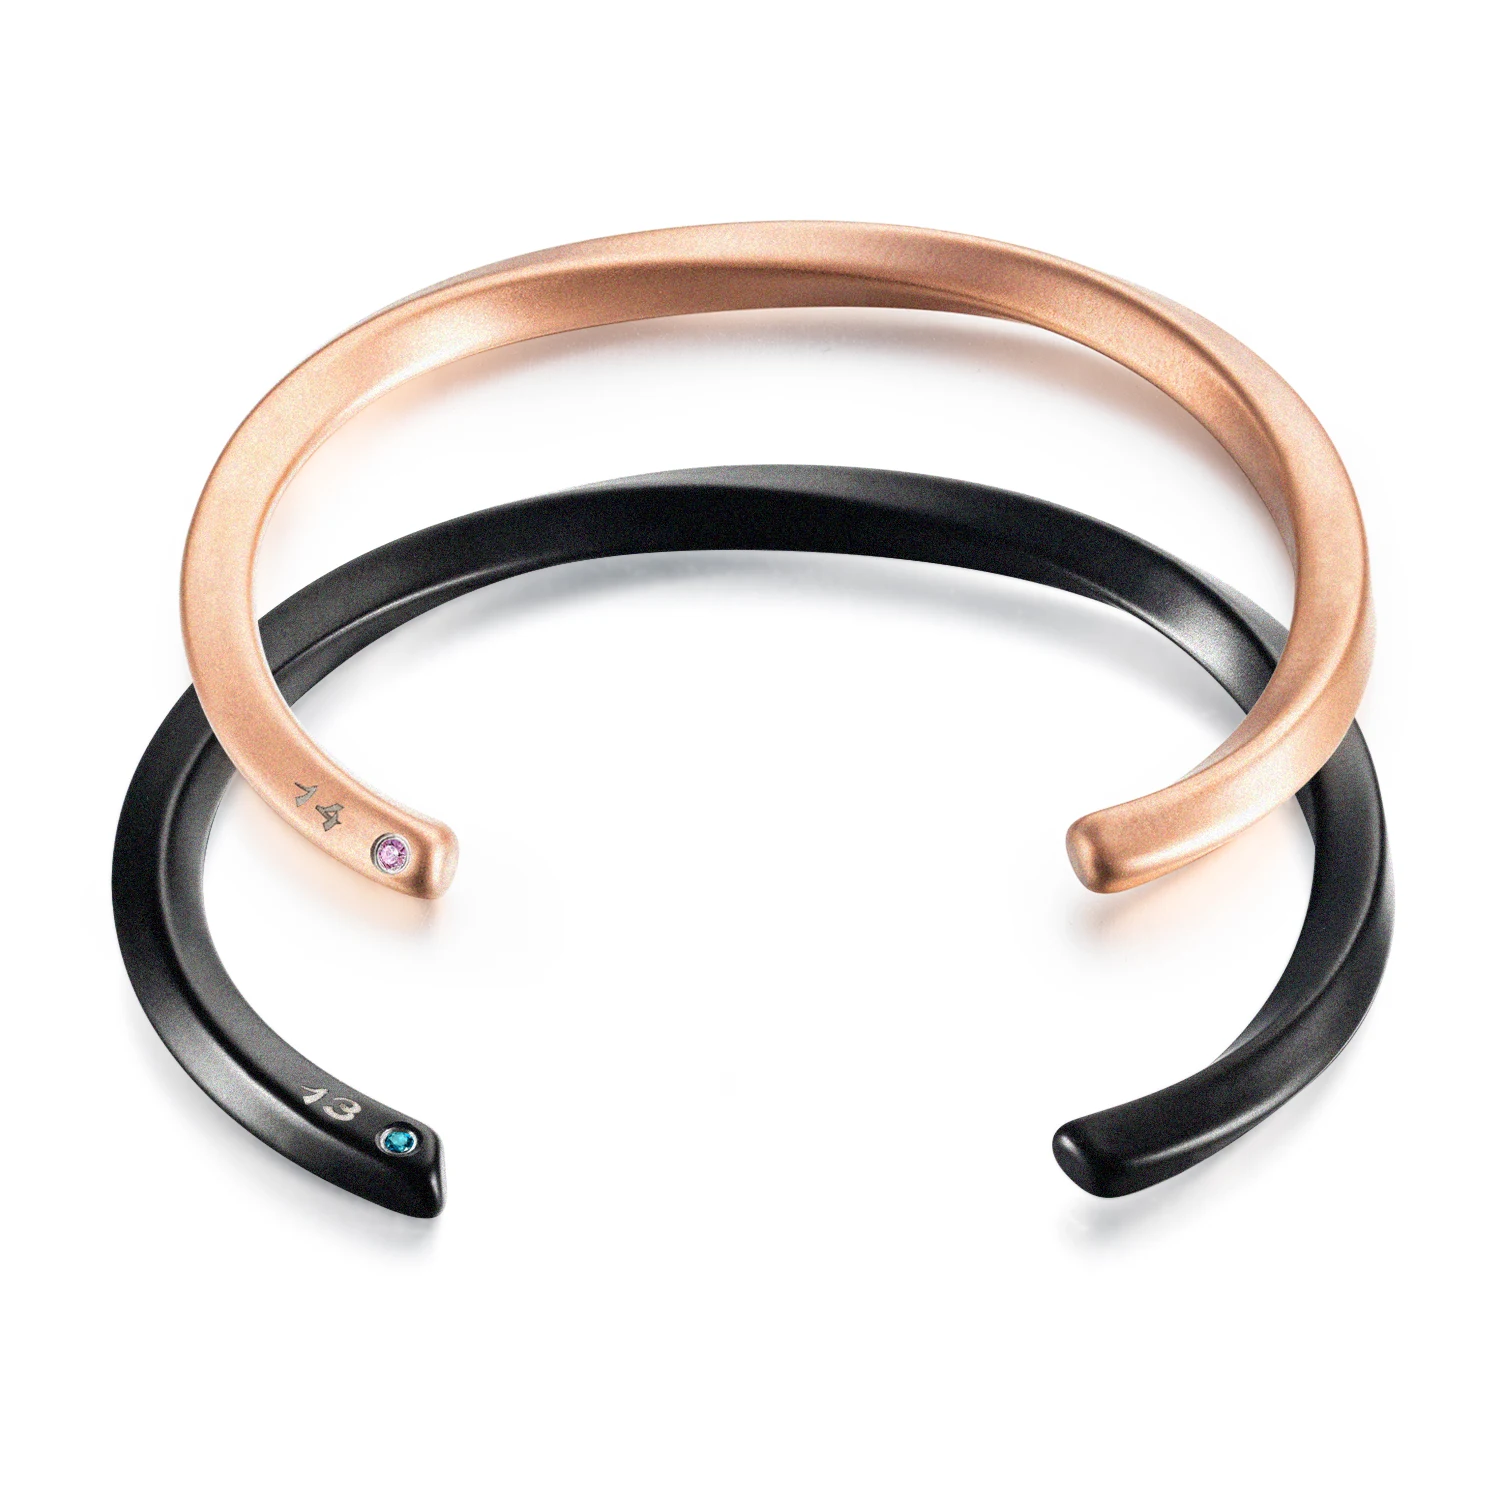 

Hot Sale Twisted Line Half Open Lovers Bangle Bracelet Stainless Steel Custom Engraved Cuff Bangles with OEM Service Wholesale, Silver, black, rose gold